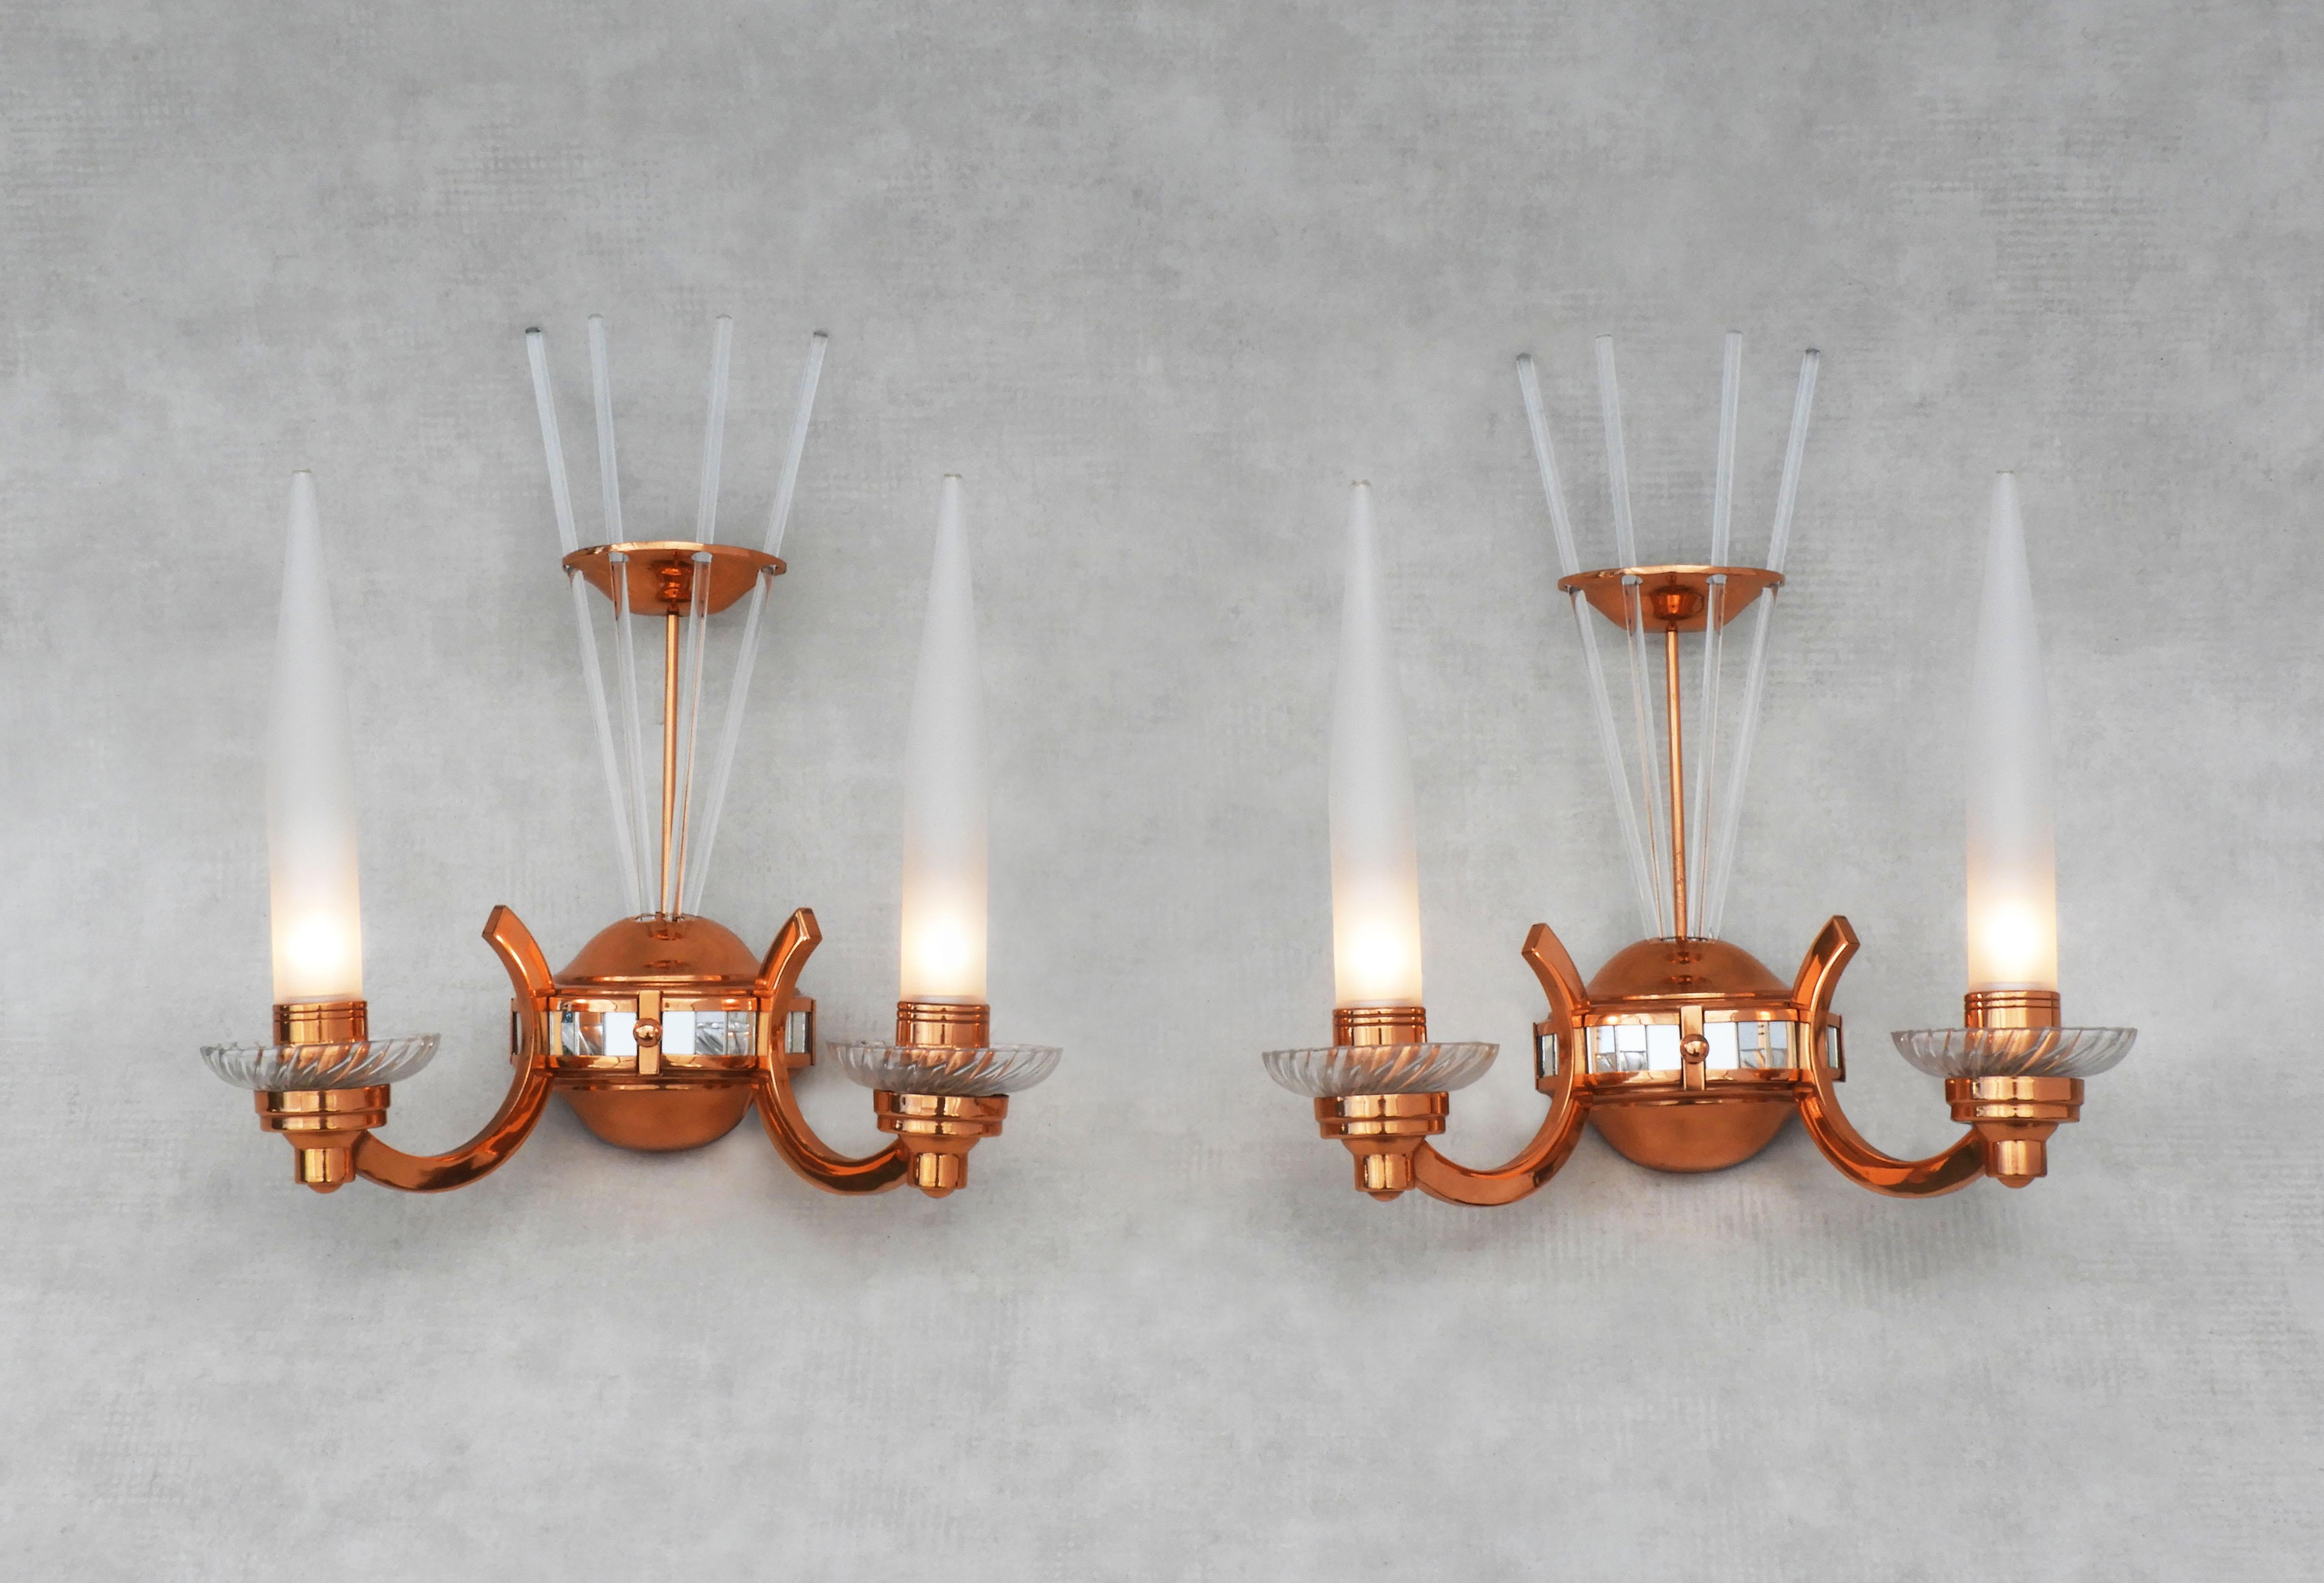 A stunning pair of French Art Deco wall light sconces attributed to Atelier Petitot.

Unusual copper and glass, demi orb shaped appliques decorated with a band of mirrored squares and four fine glass batons. Each light has two crystal bobeche and